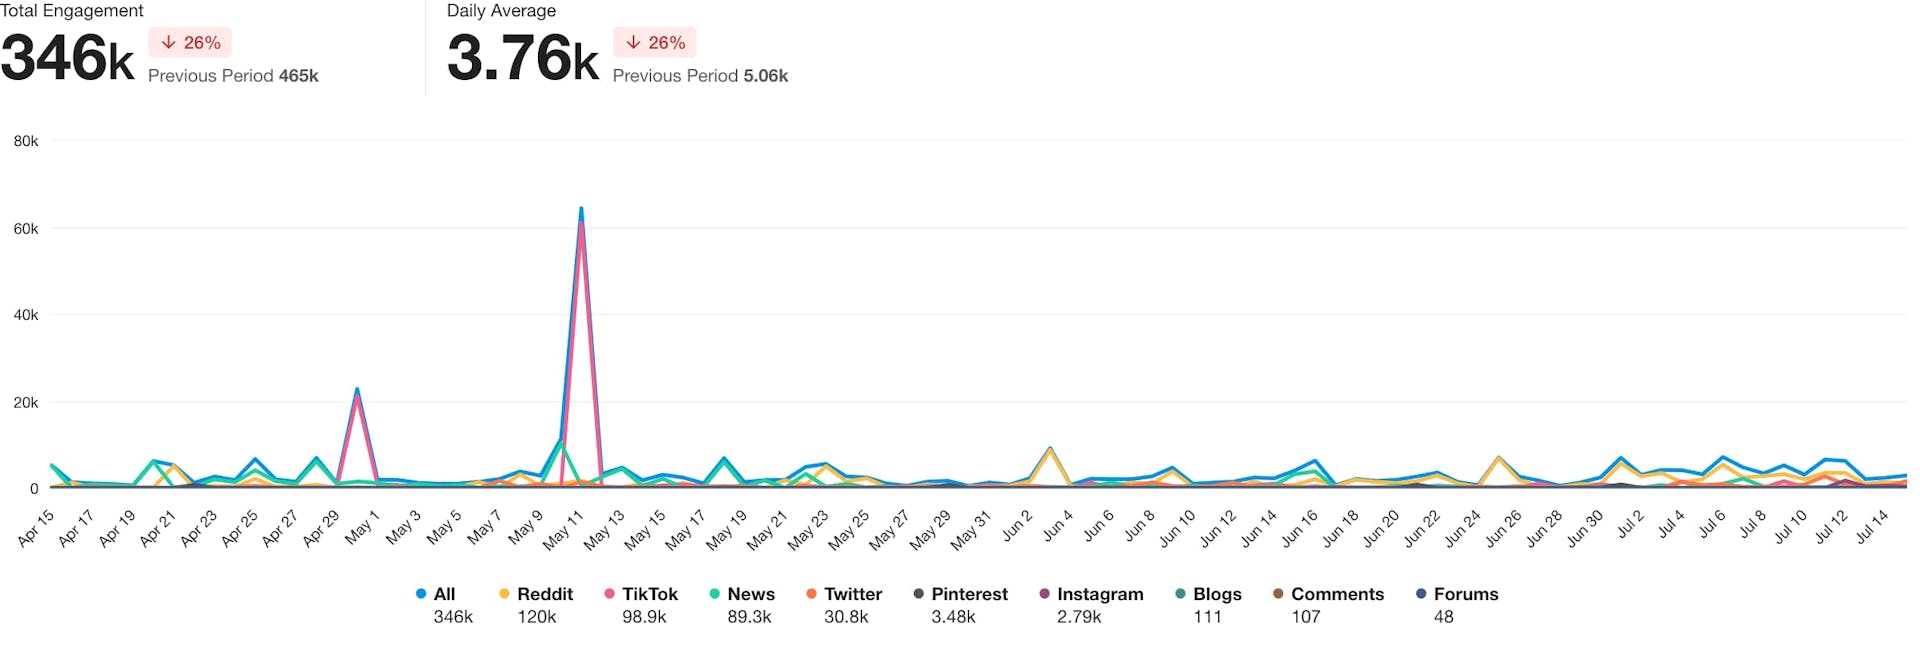 Overlapping line graphs showing engagement by source over time. Reddit has the highest engagement at 120K, while TikTok saw the largest engagement spike on May 11 at 61K.